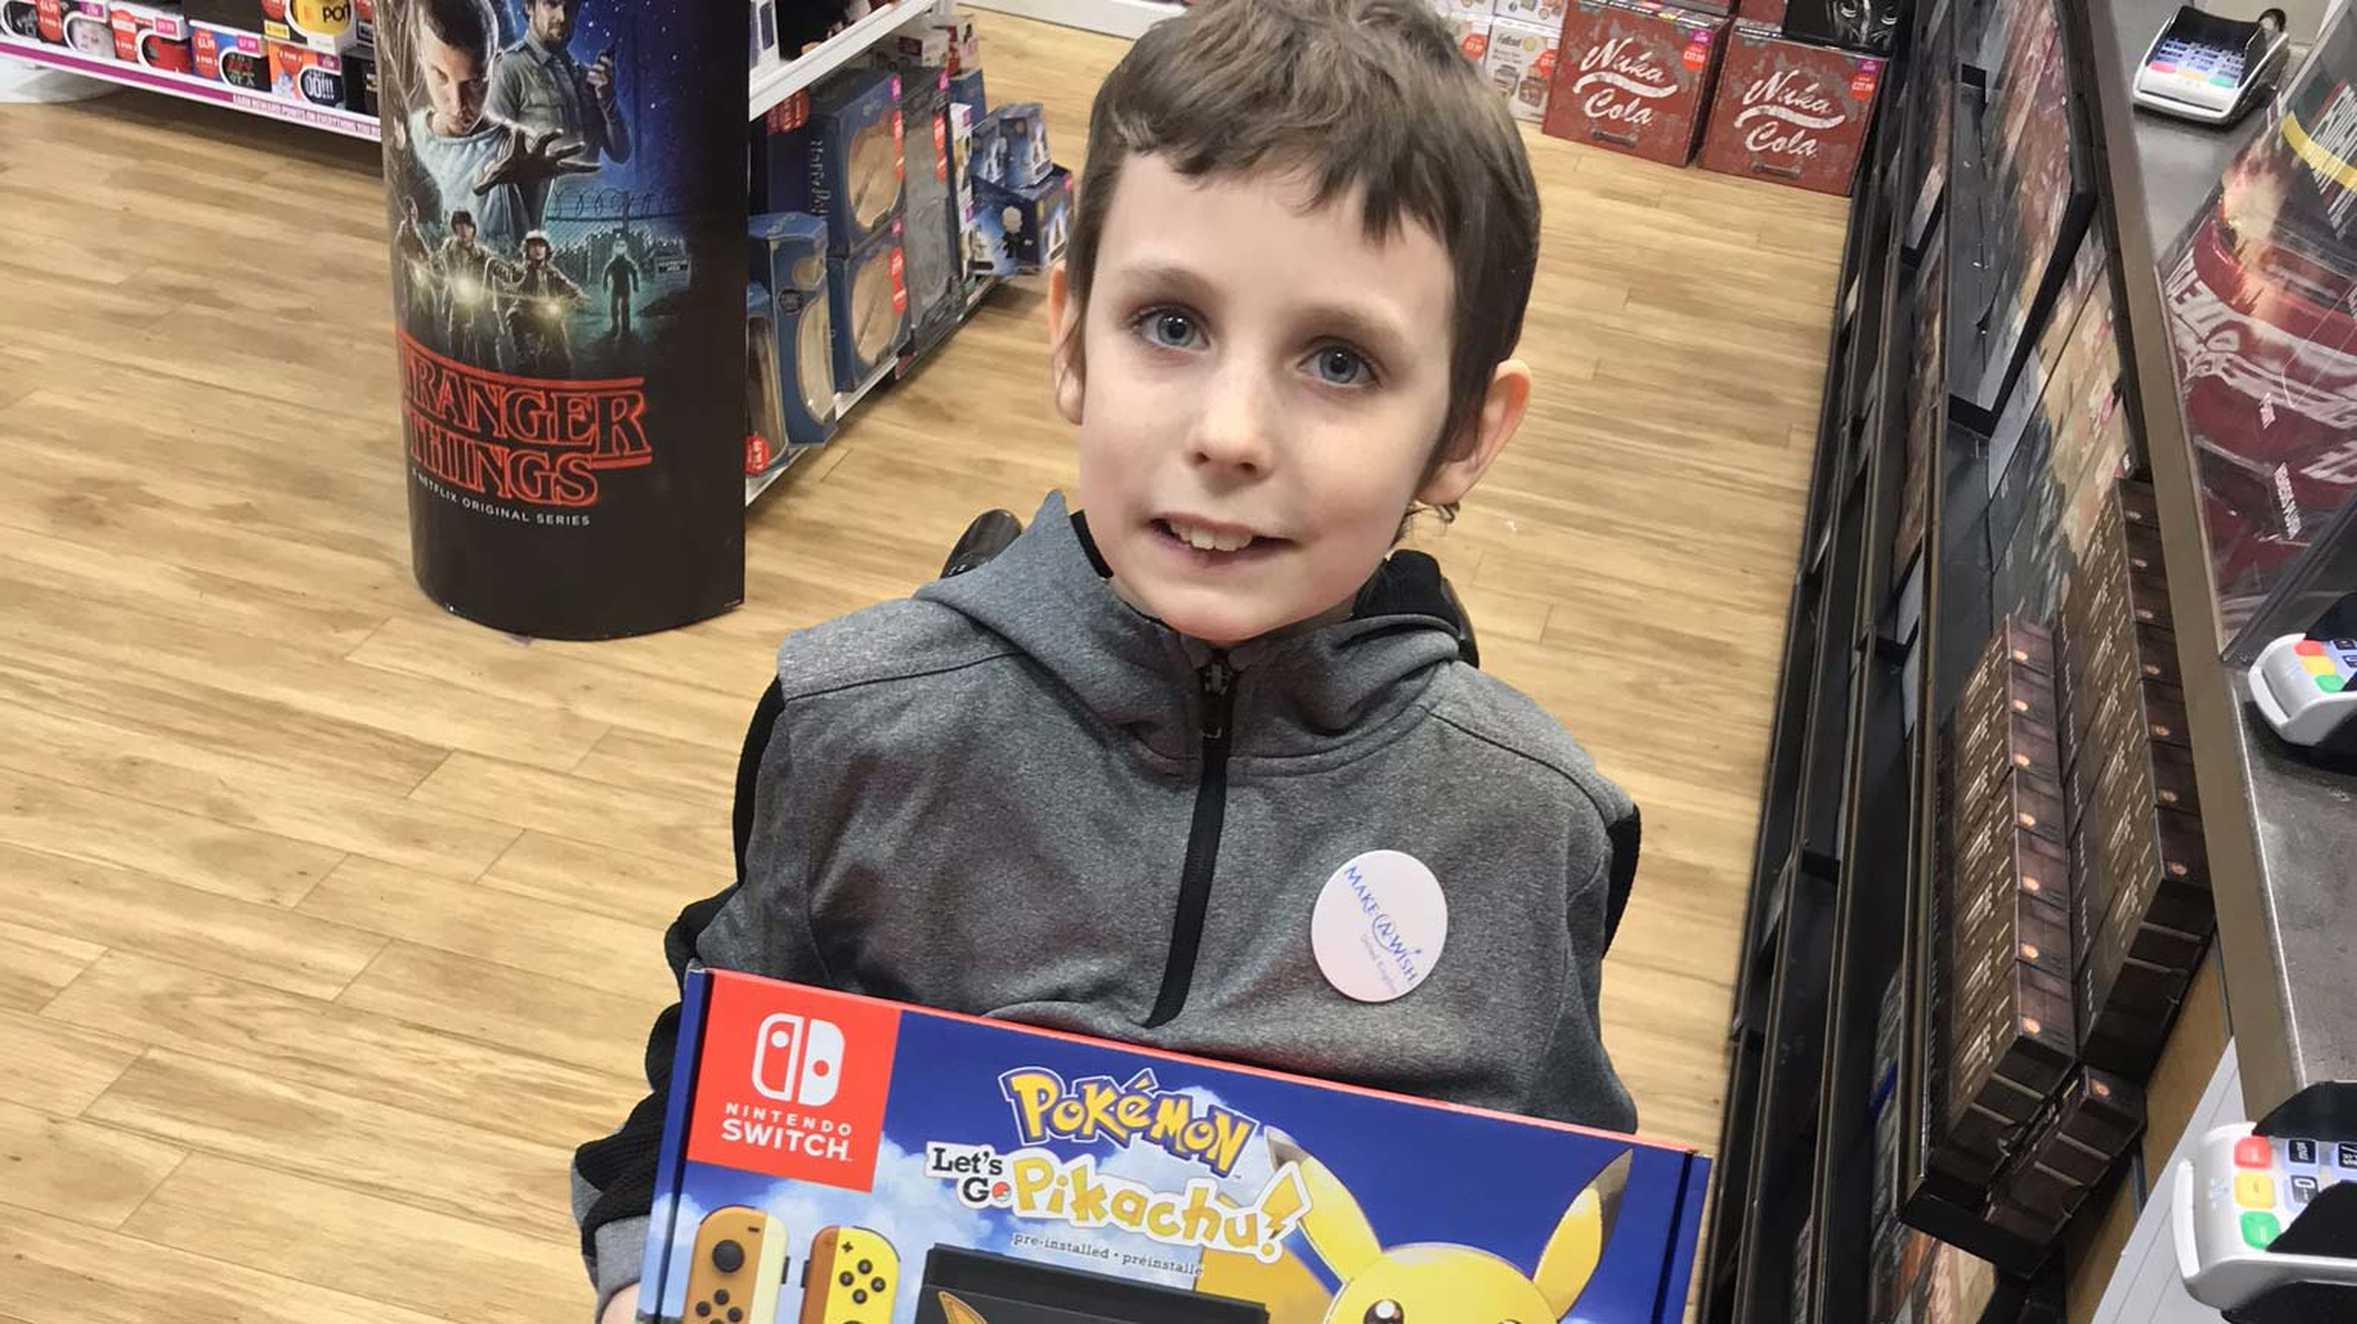 Charlie with his new Nintendo Switch